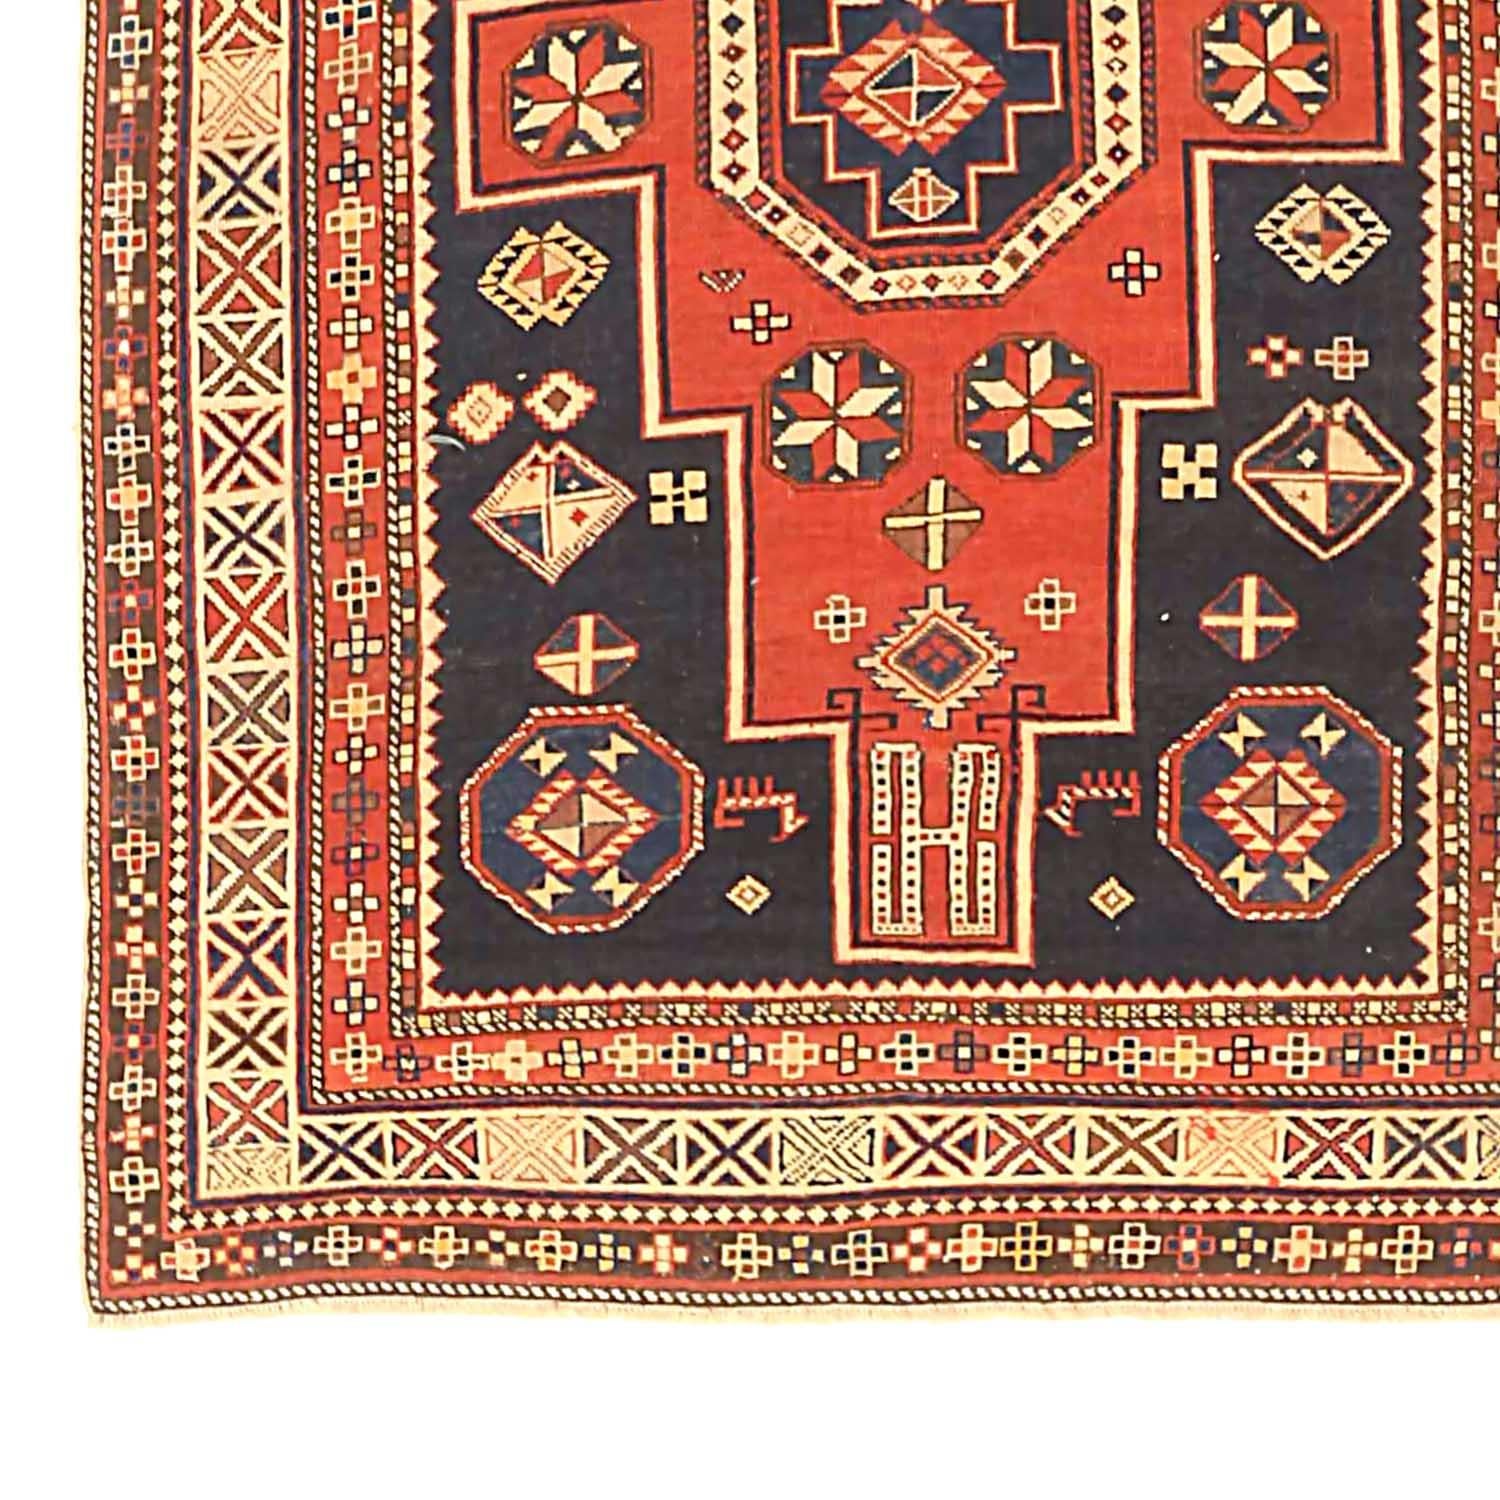 Antique Russian area rug handwoven from the finest sheep’s wool. It’s colored with all-natural vegetable dyes that are safe for humans and pets. It’s a traditional Shirvan design handwoven by expert artisans. It’s a lovely area rug that can be